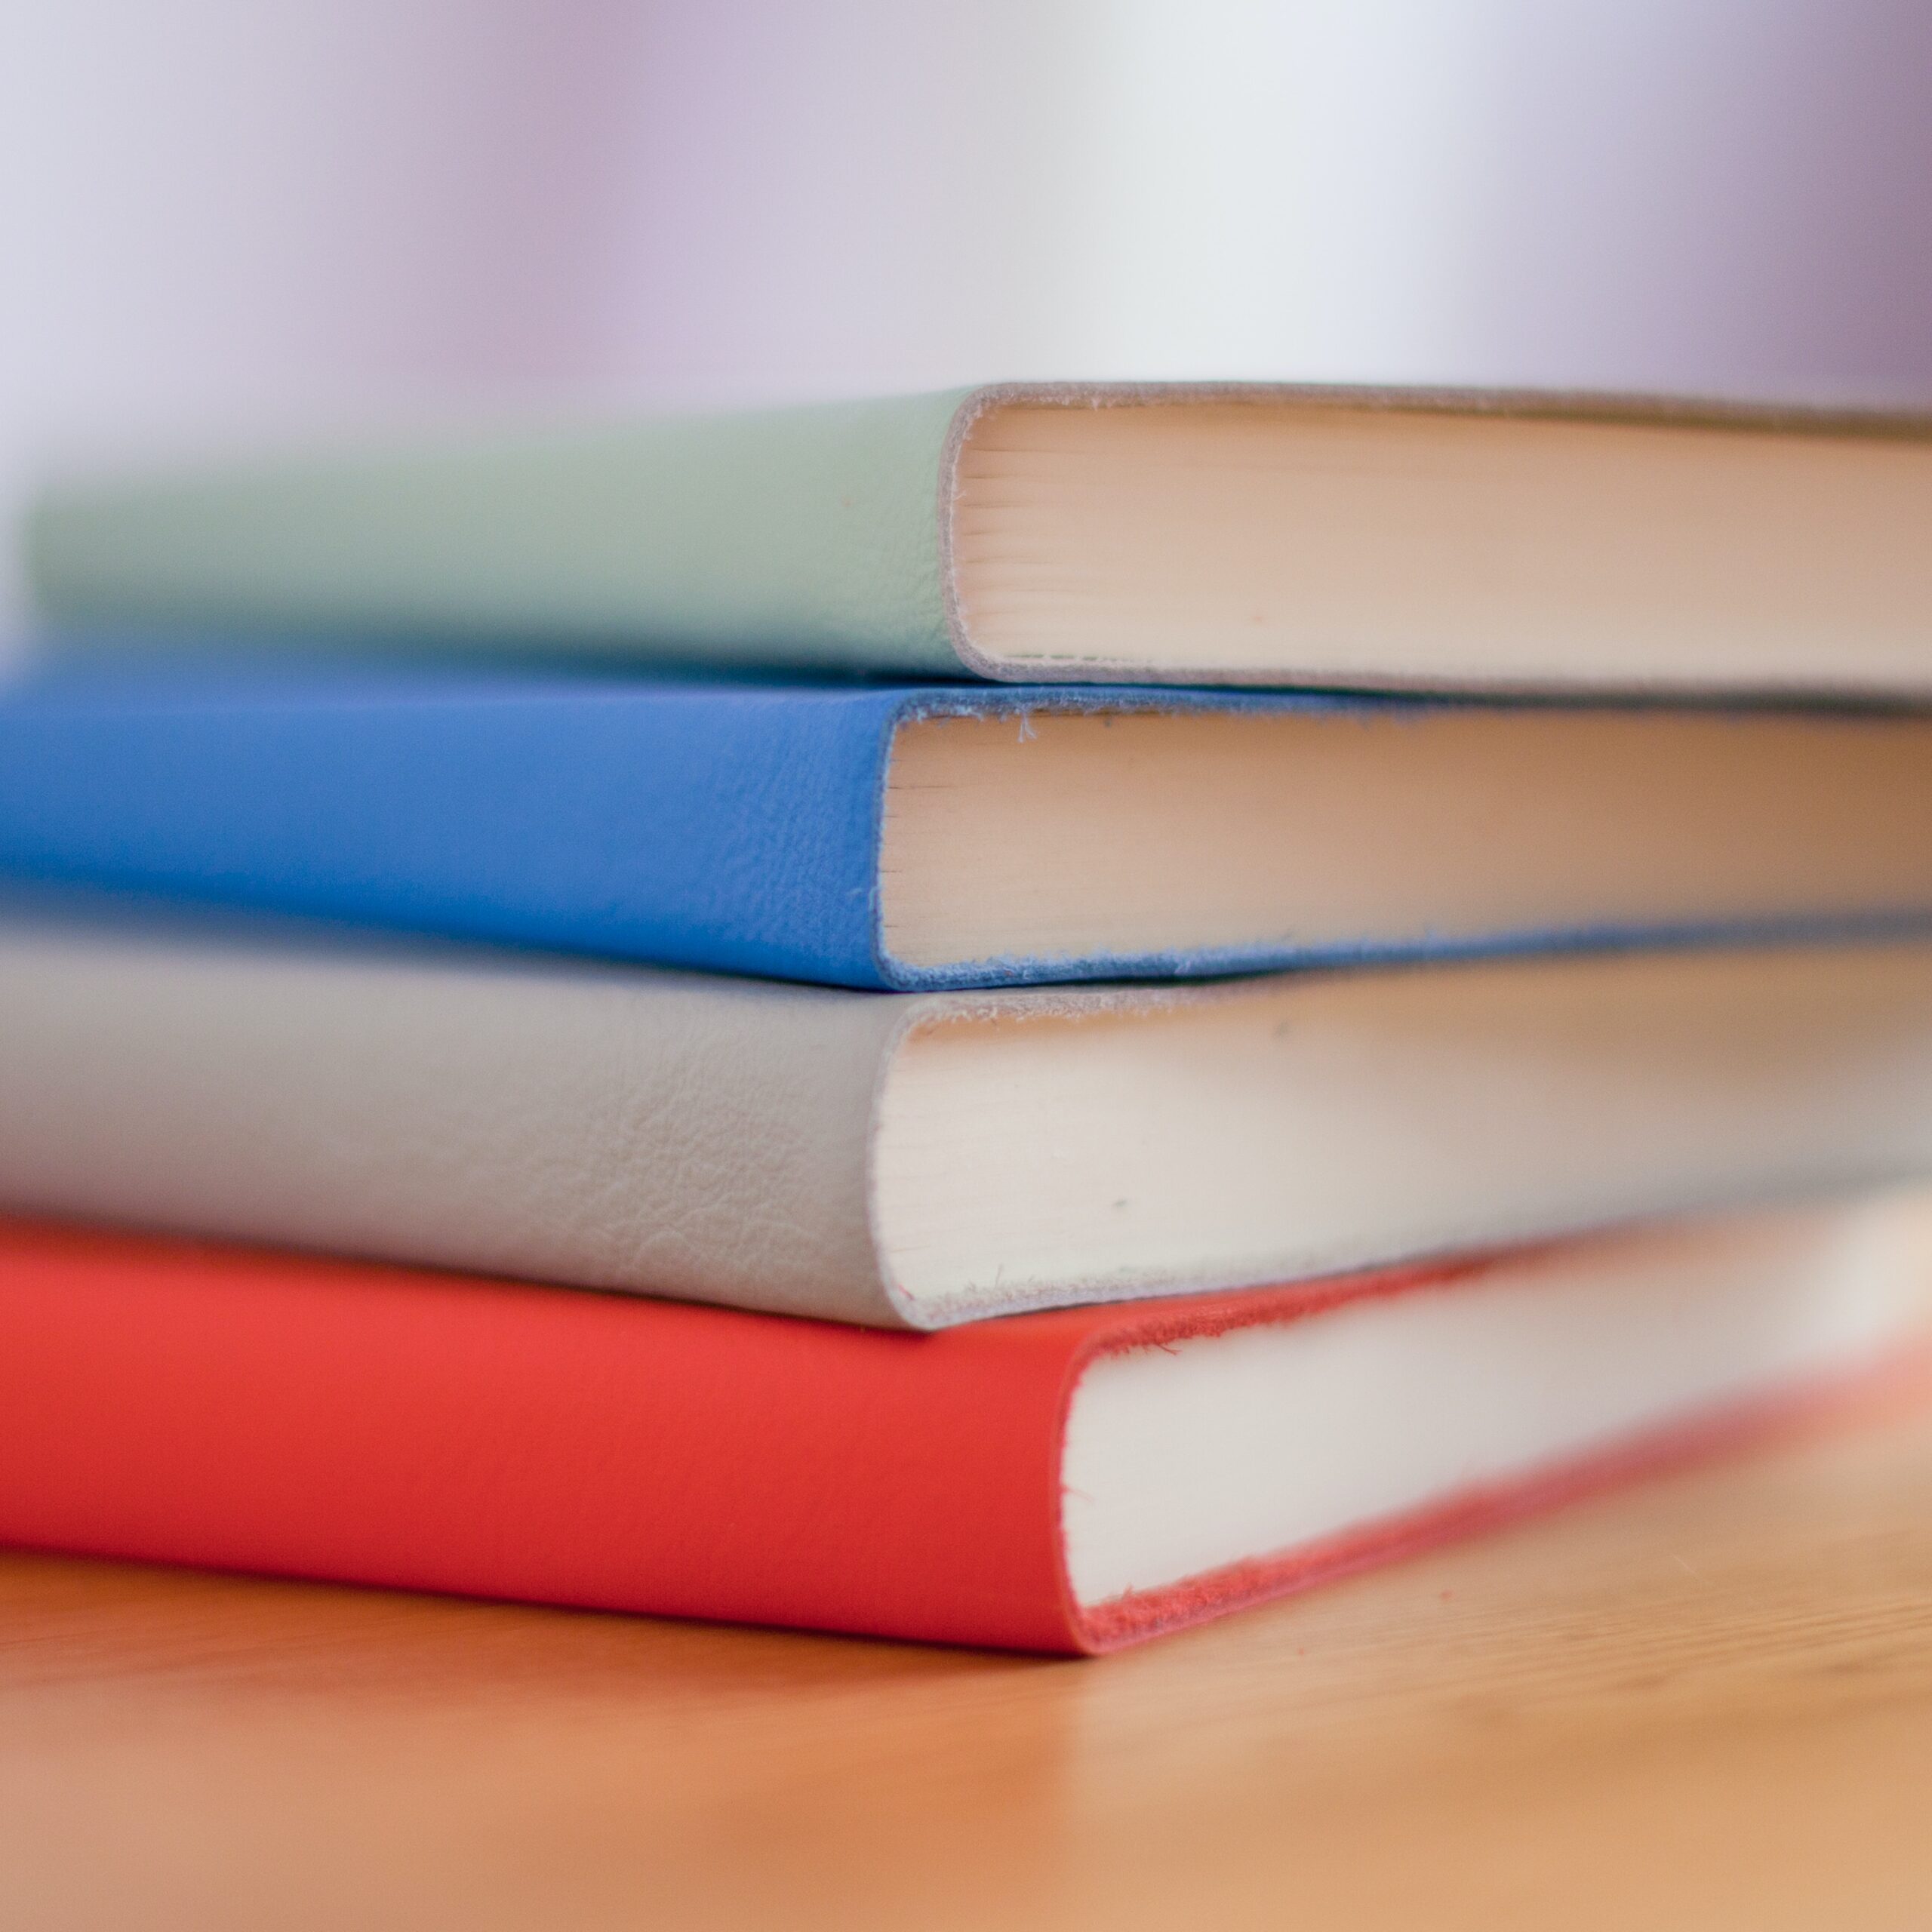 Stack of four colorful books